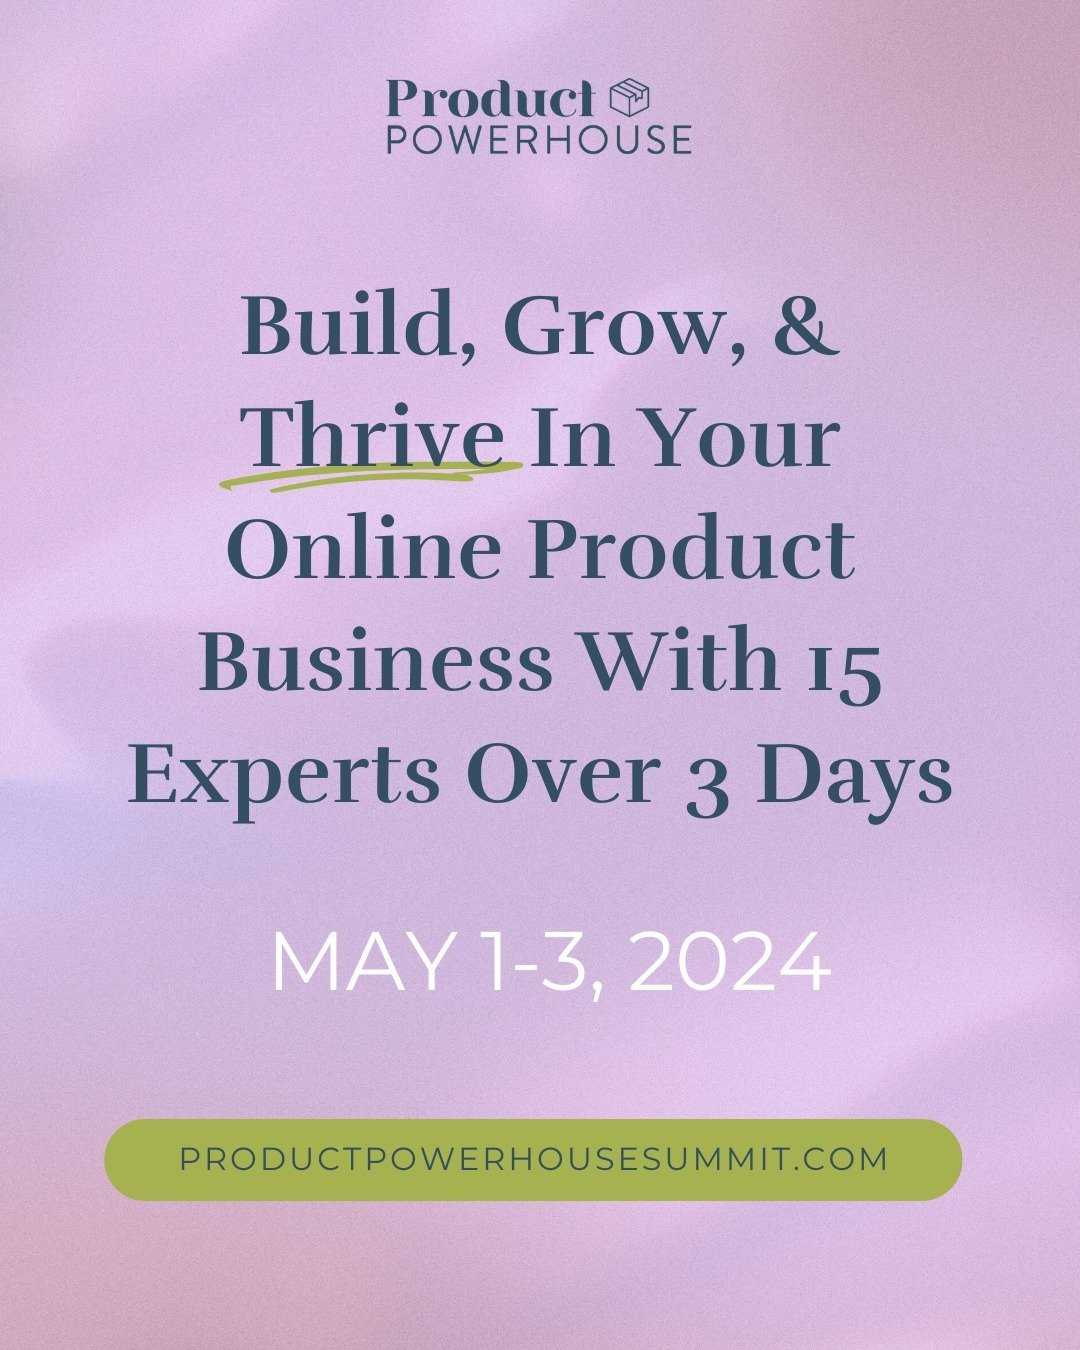 Big News, Friends! 🎉⁣
⁣
Ready to THRIVE in your online product biz? It&rsquo;s time for the 3rd Product Powerhouse Summit - and I&rsquo;m a speaker!!⁣
⁣
This isn't just any summit. It's an action-packed event dedicated to growth and success strategi